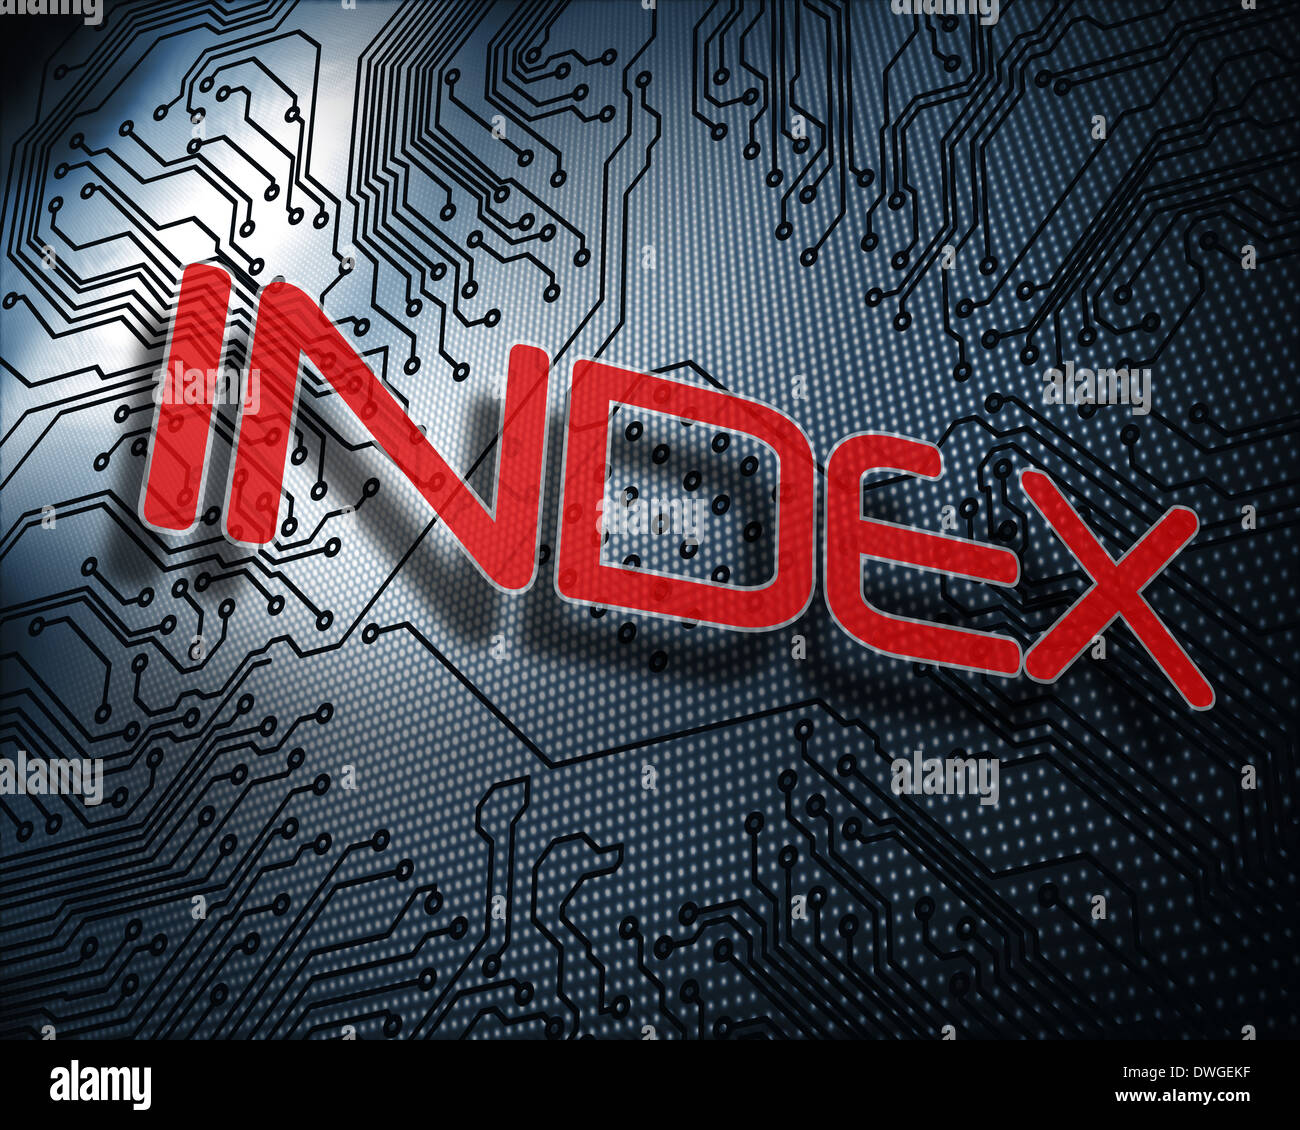 Index against illustration of circuit board Stock Photo